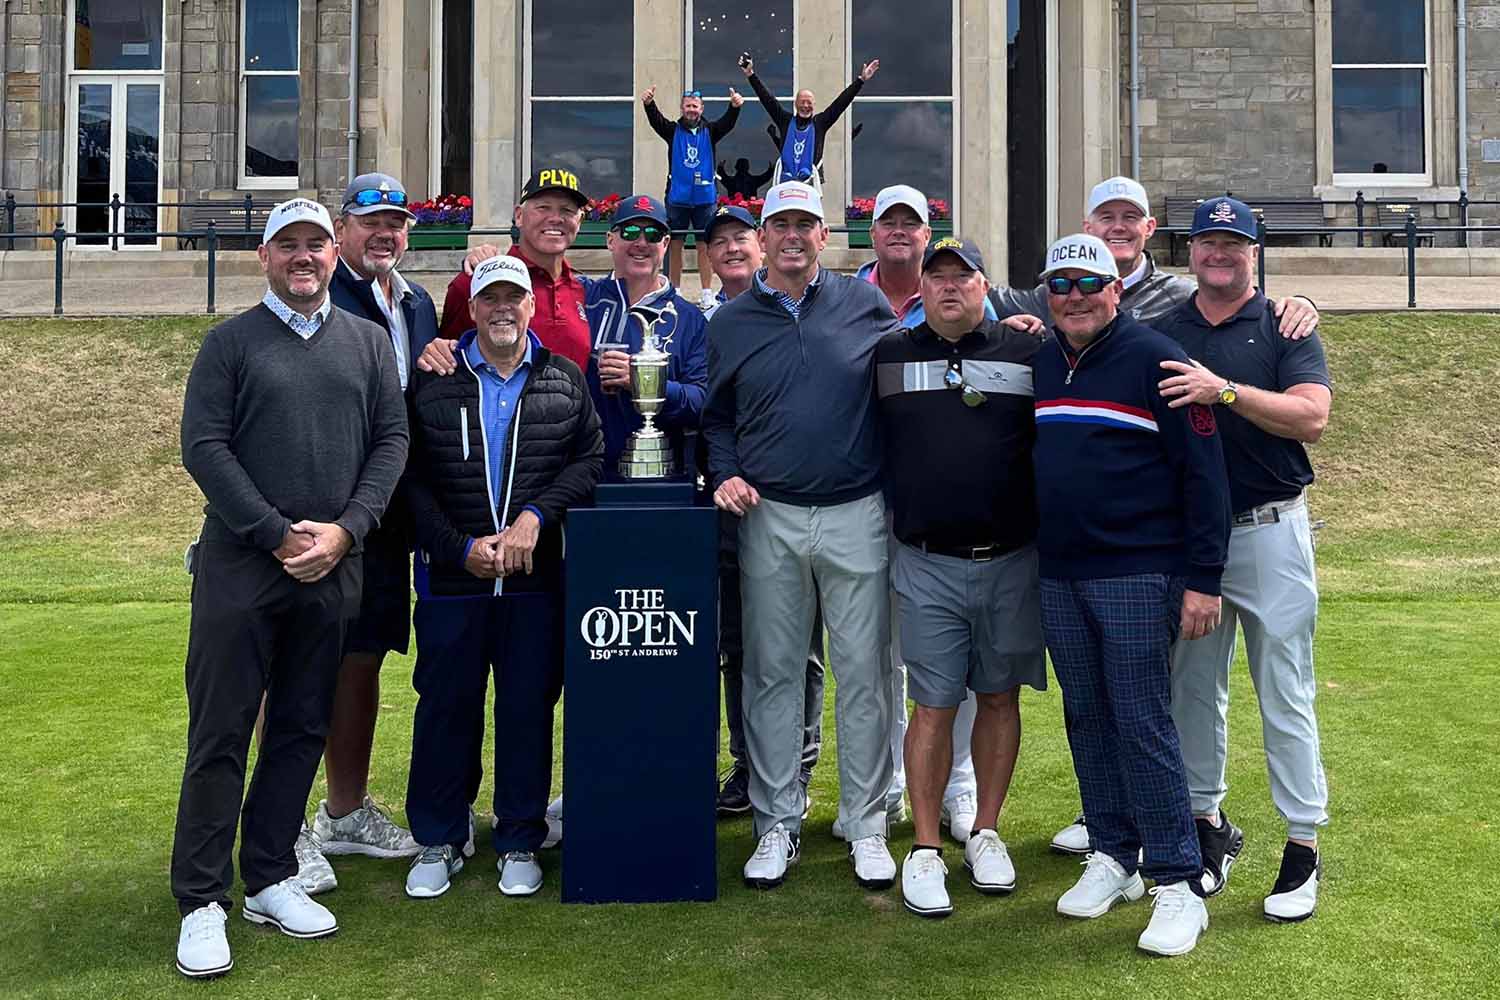 Golfers with the Claret Jug in St. Andrews